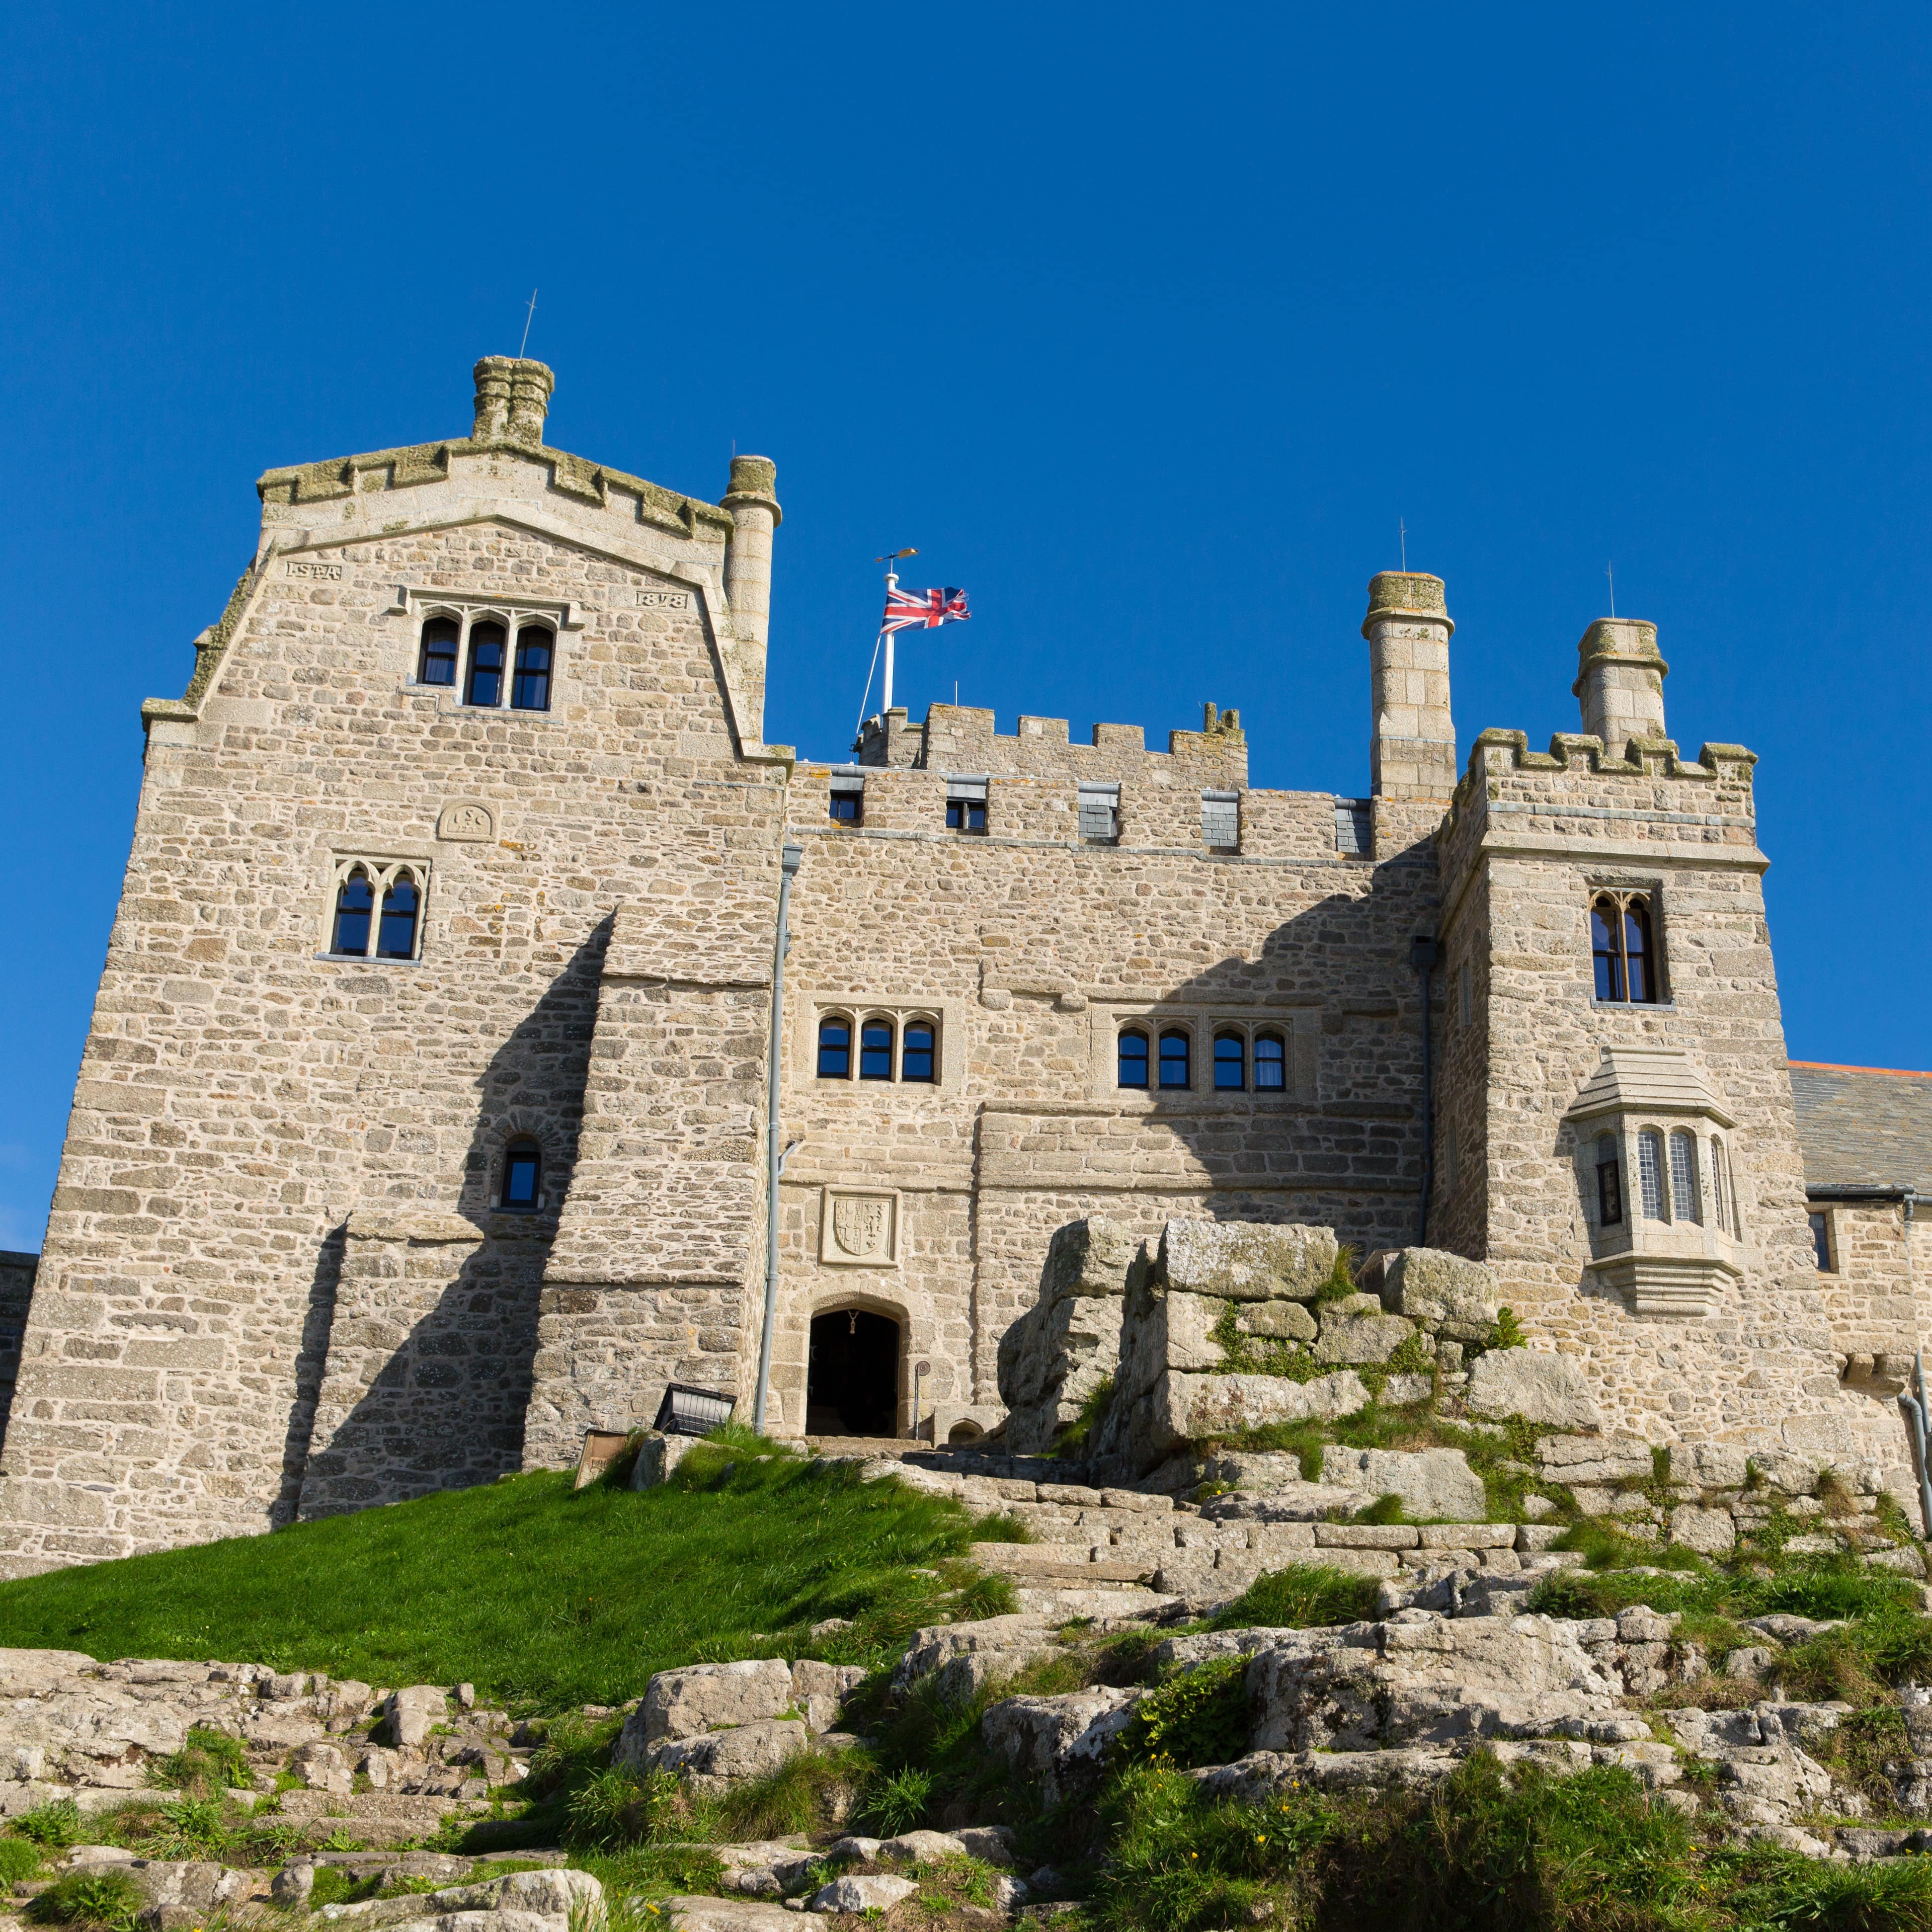 St Michael’s Mount in Cornwall